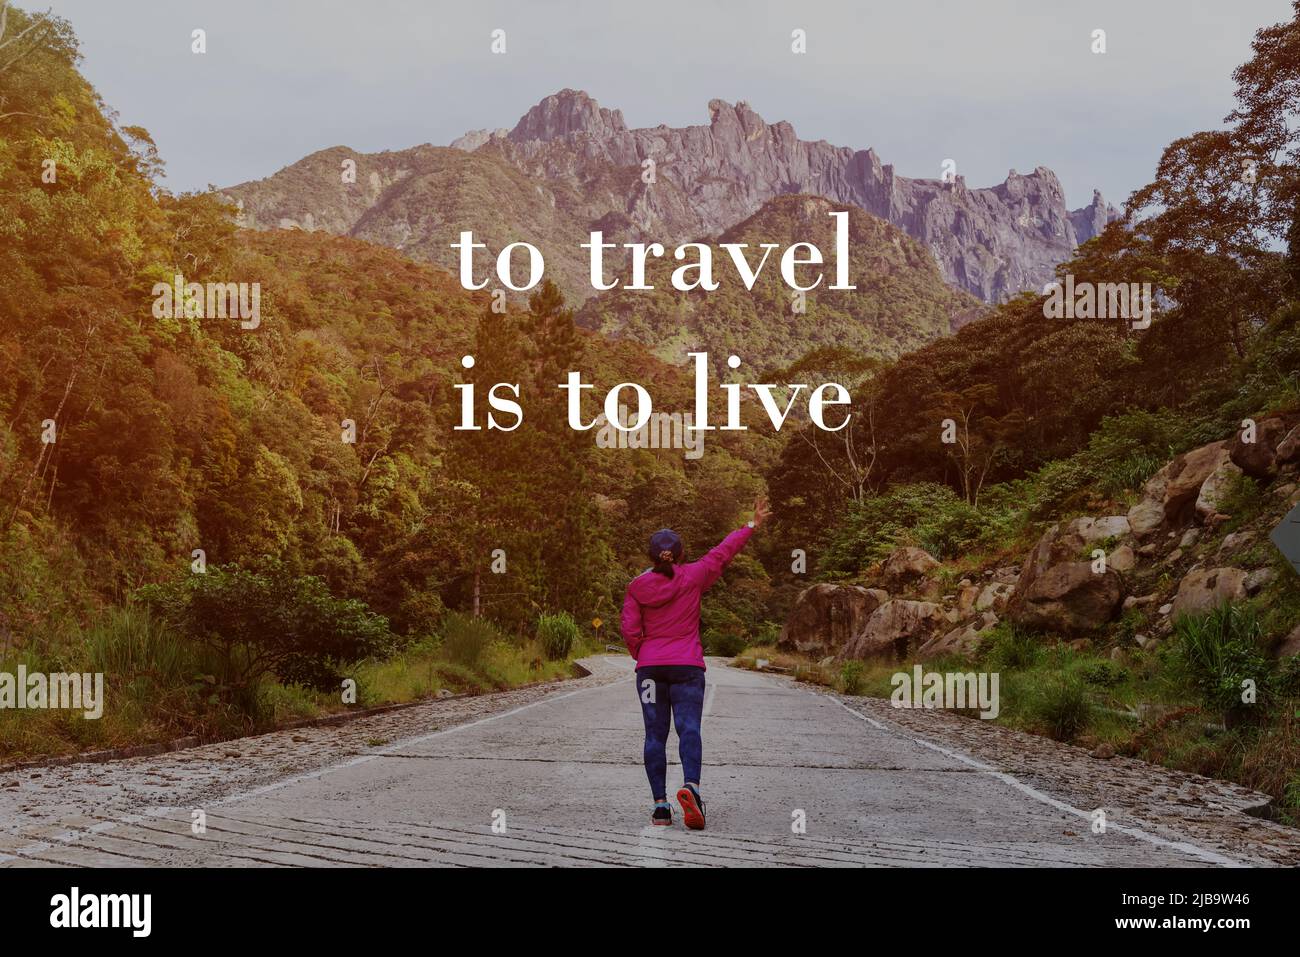 Motivational and inspirational quotes - To travel is to live Stock Photo